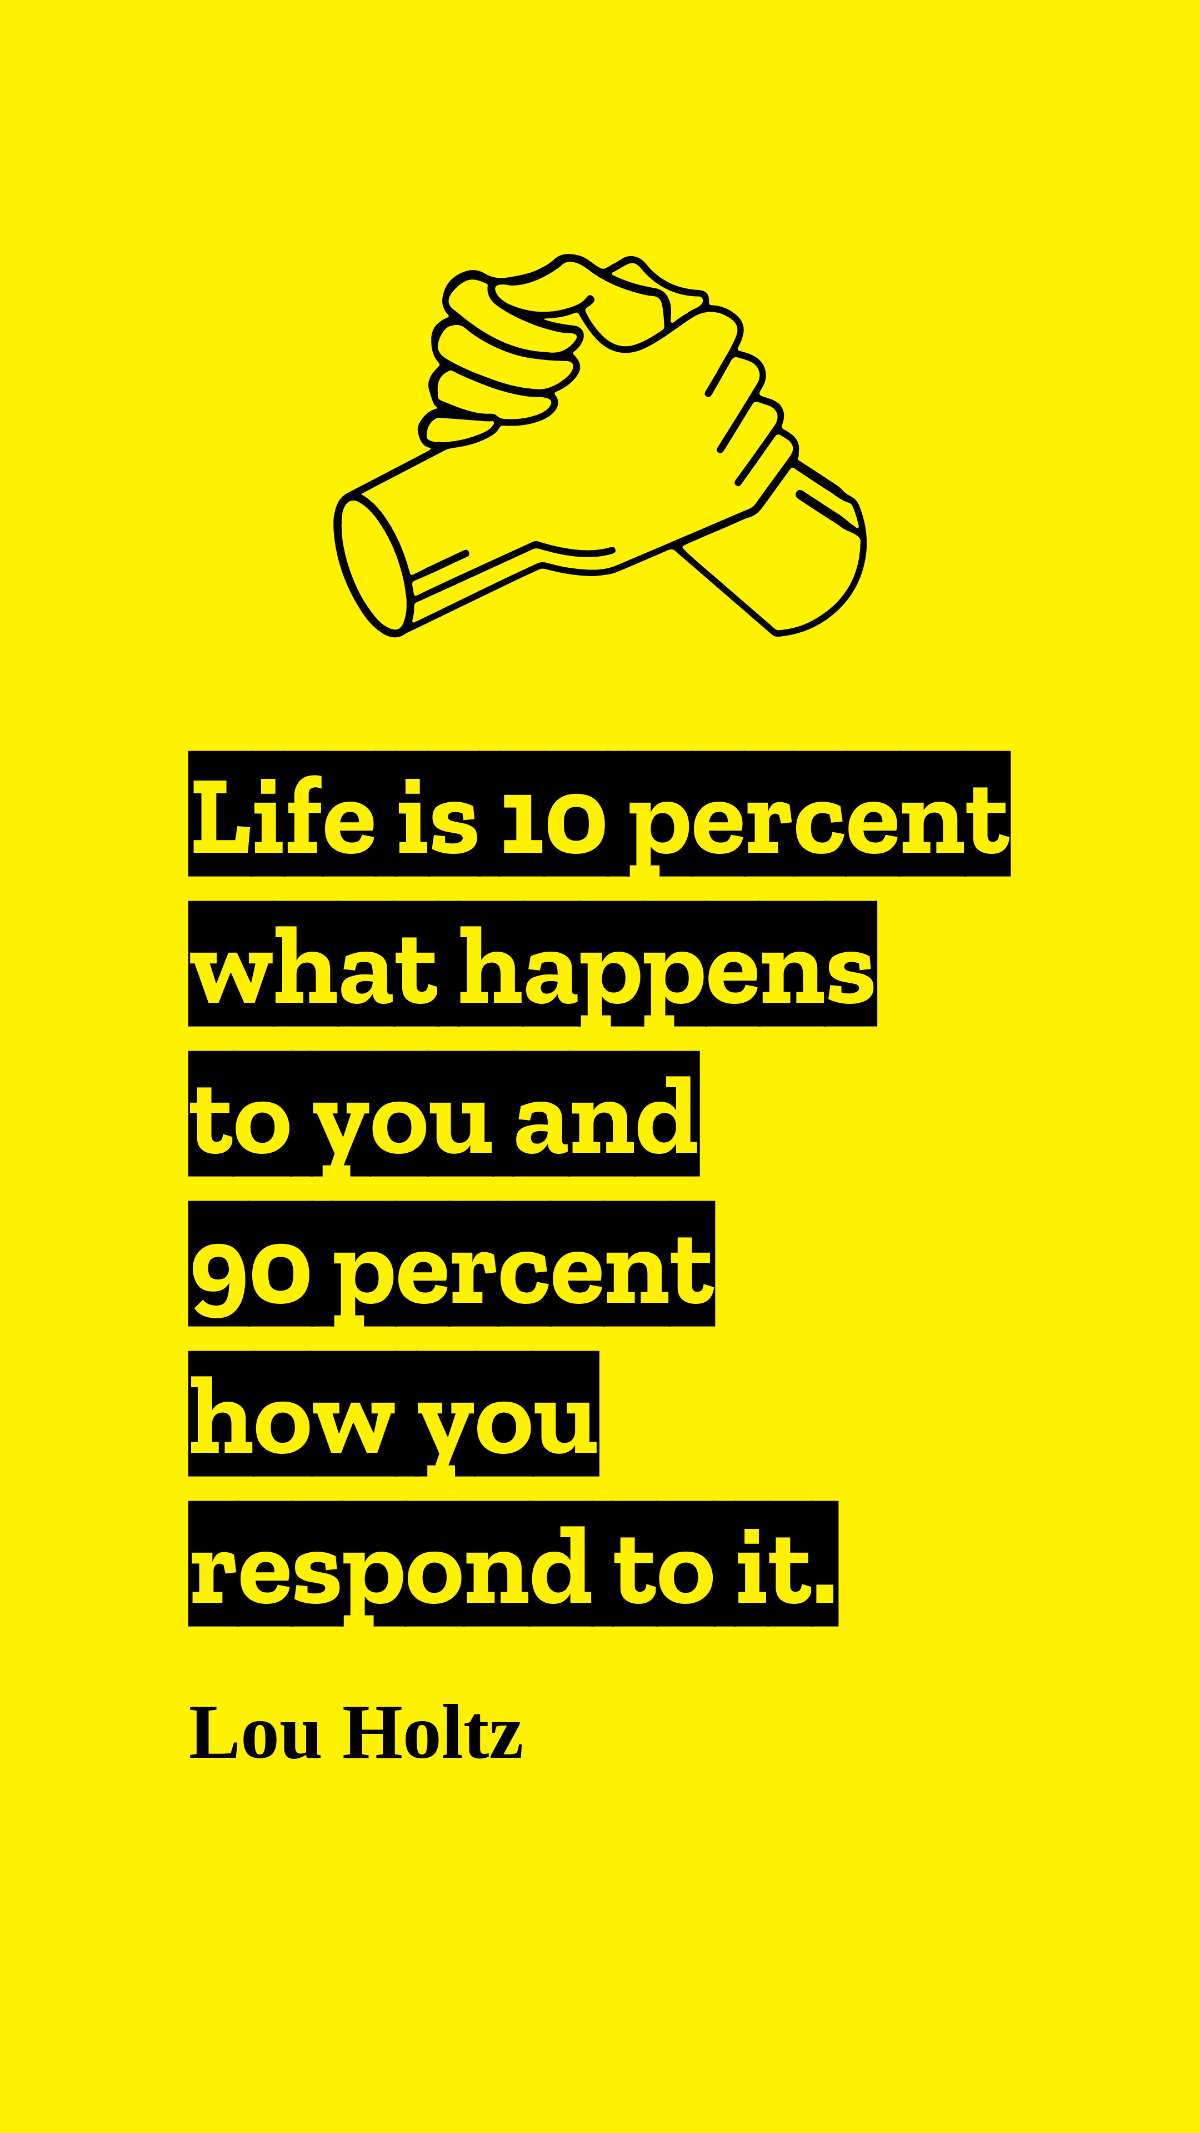 Free Lou Holtz - Life is 10 percent what happens to you and 90 percent how you respond to it. Template